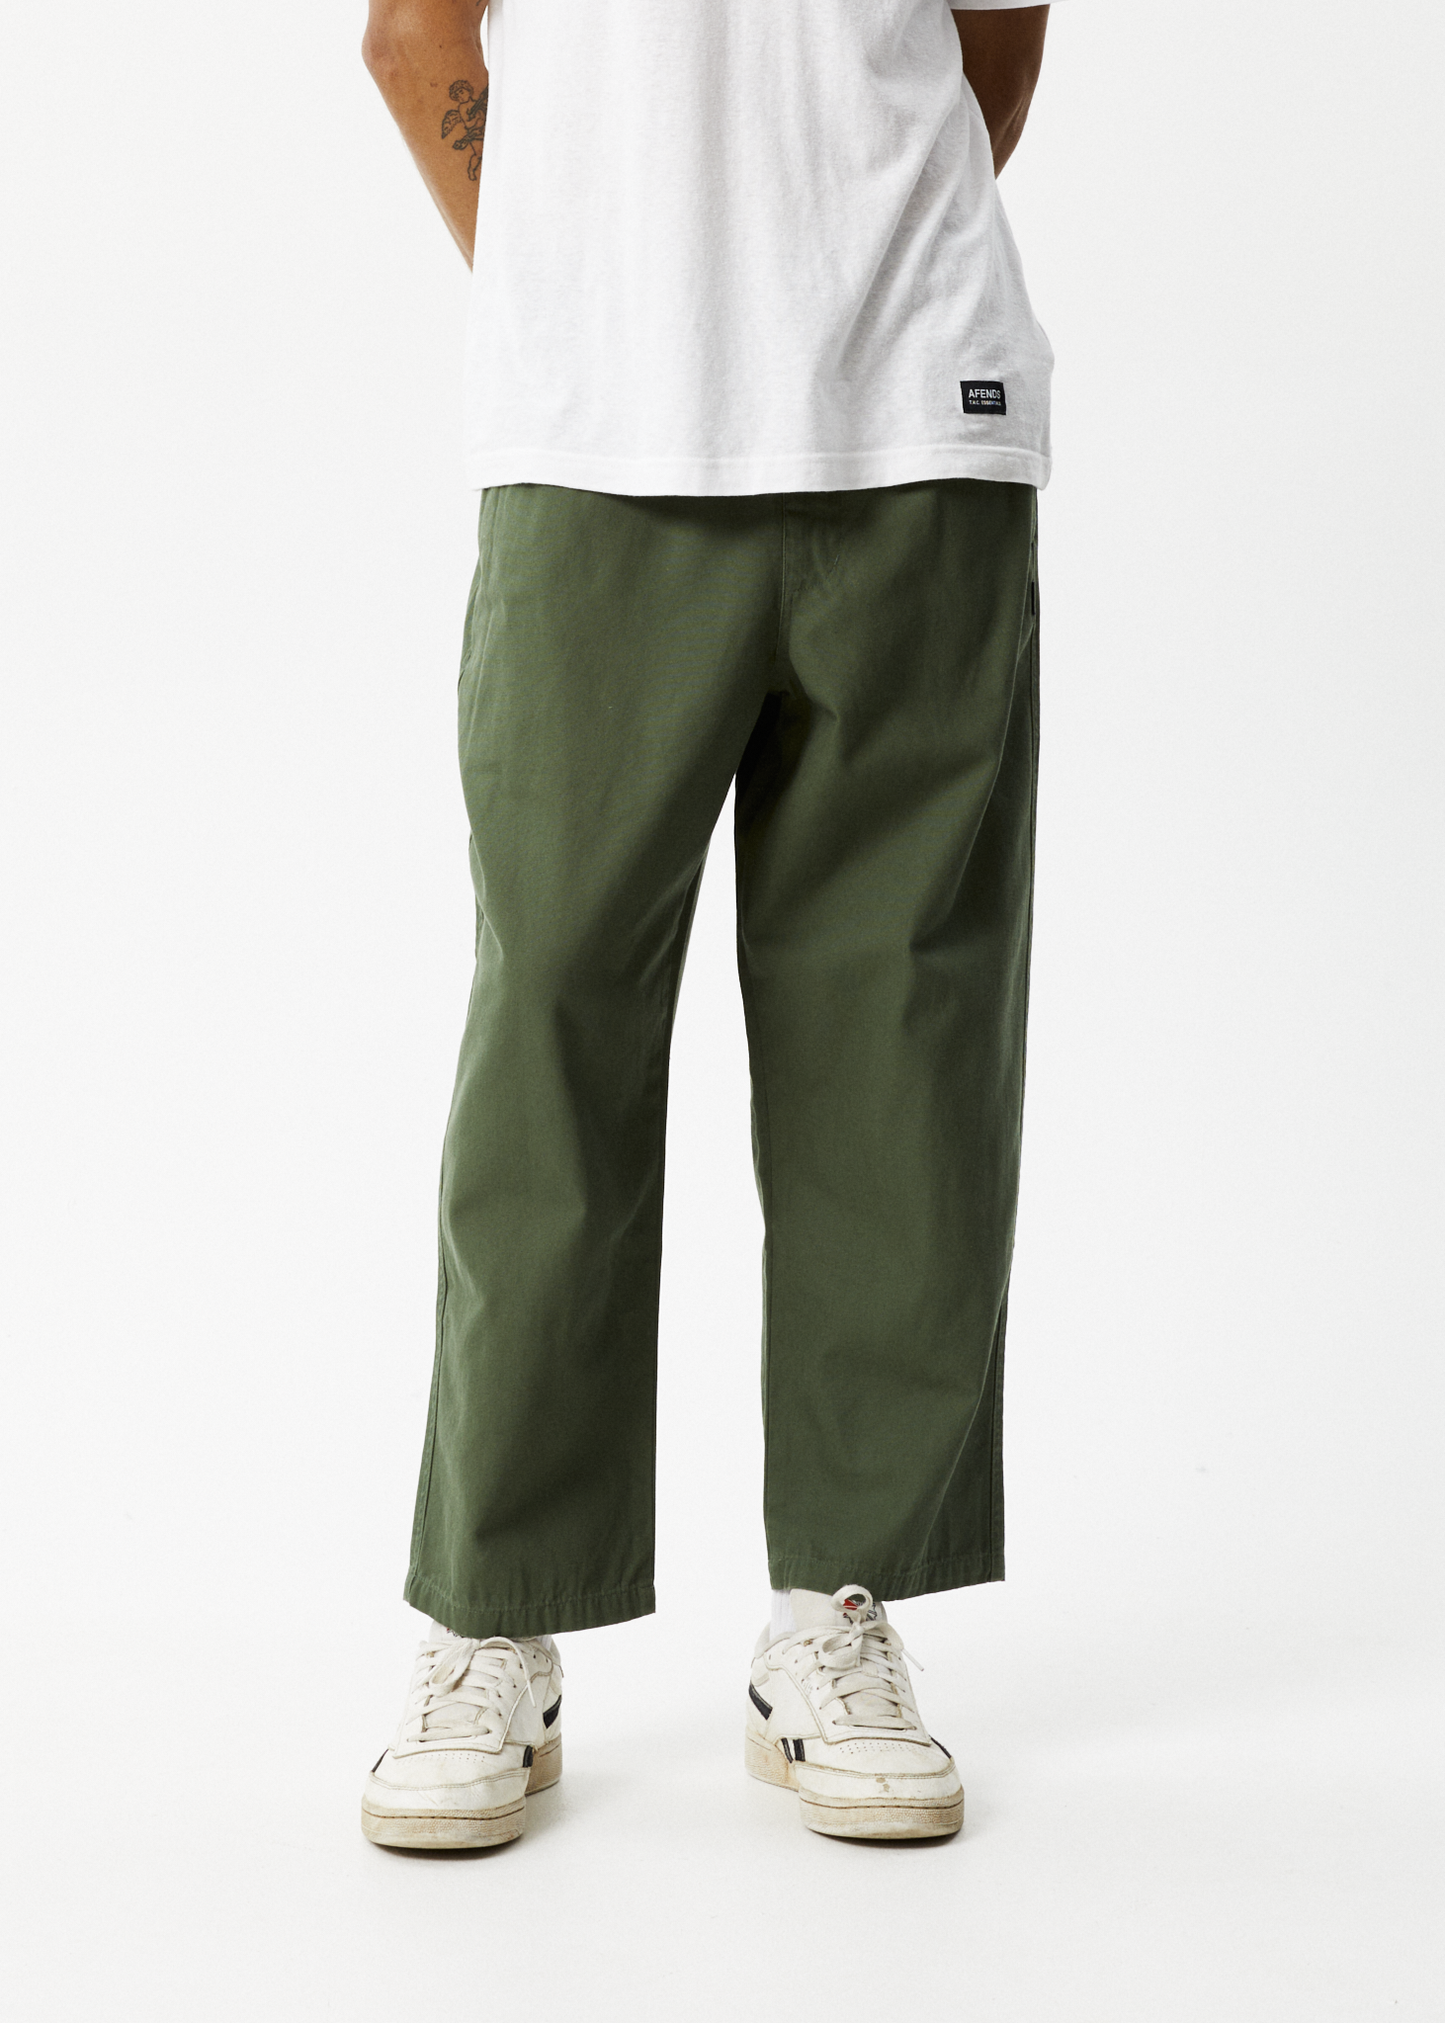 Afends Mens Ninety Eights - Recycled Baggy Elastic Waist Pants - Cypress 